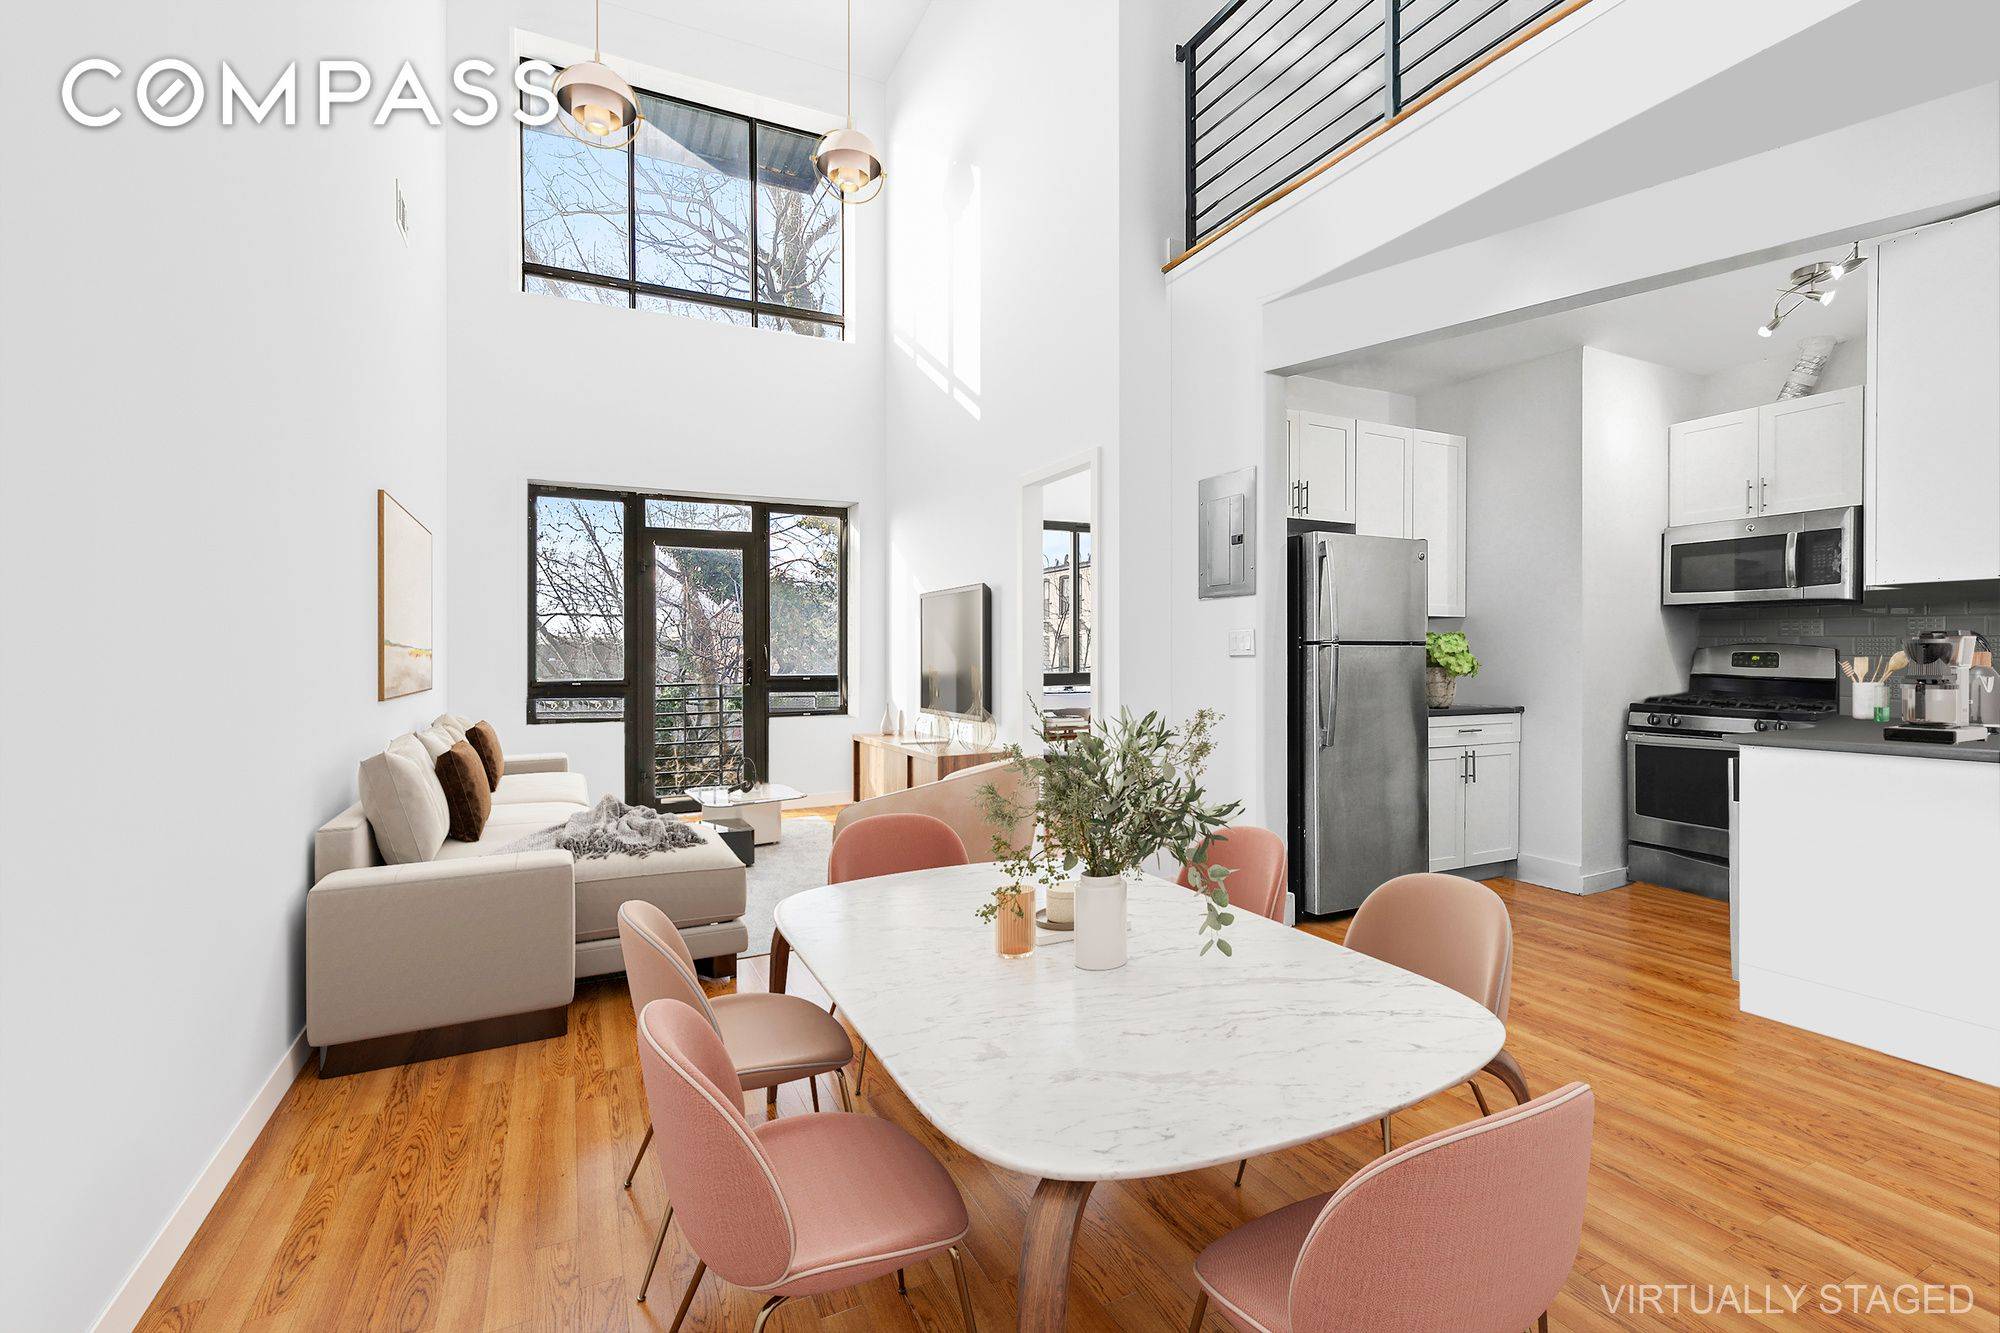 421A tax abatement through 2030 Discover your investment opportunity at 194 Stuyvesant Ave, a true gem for seasoned investors and newcomers to the NYC market alike.